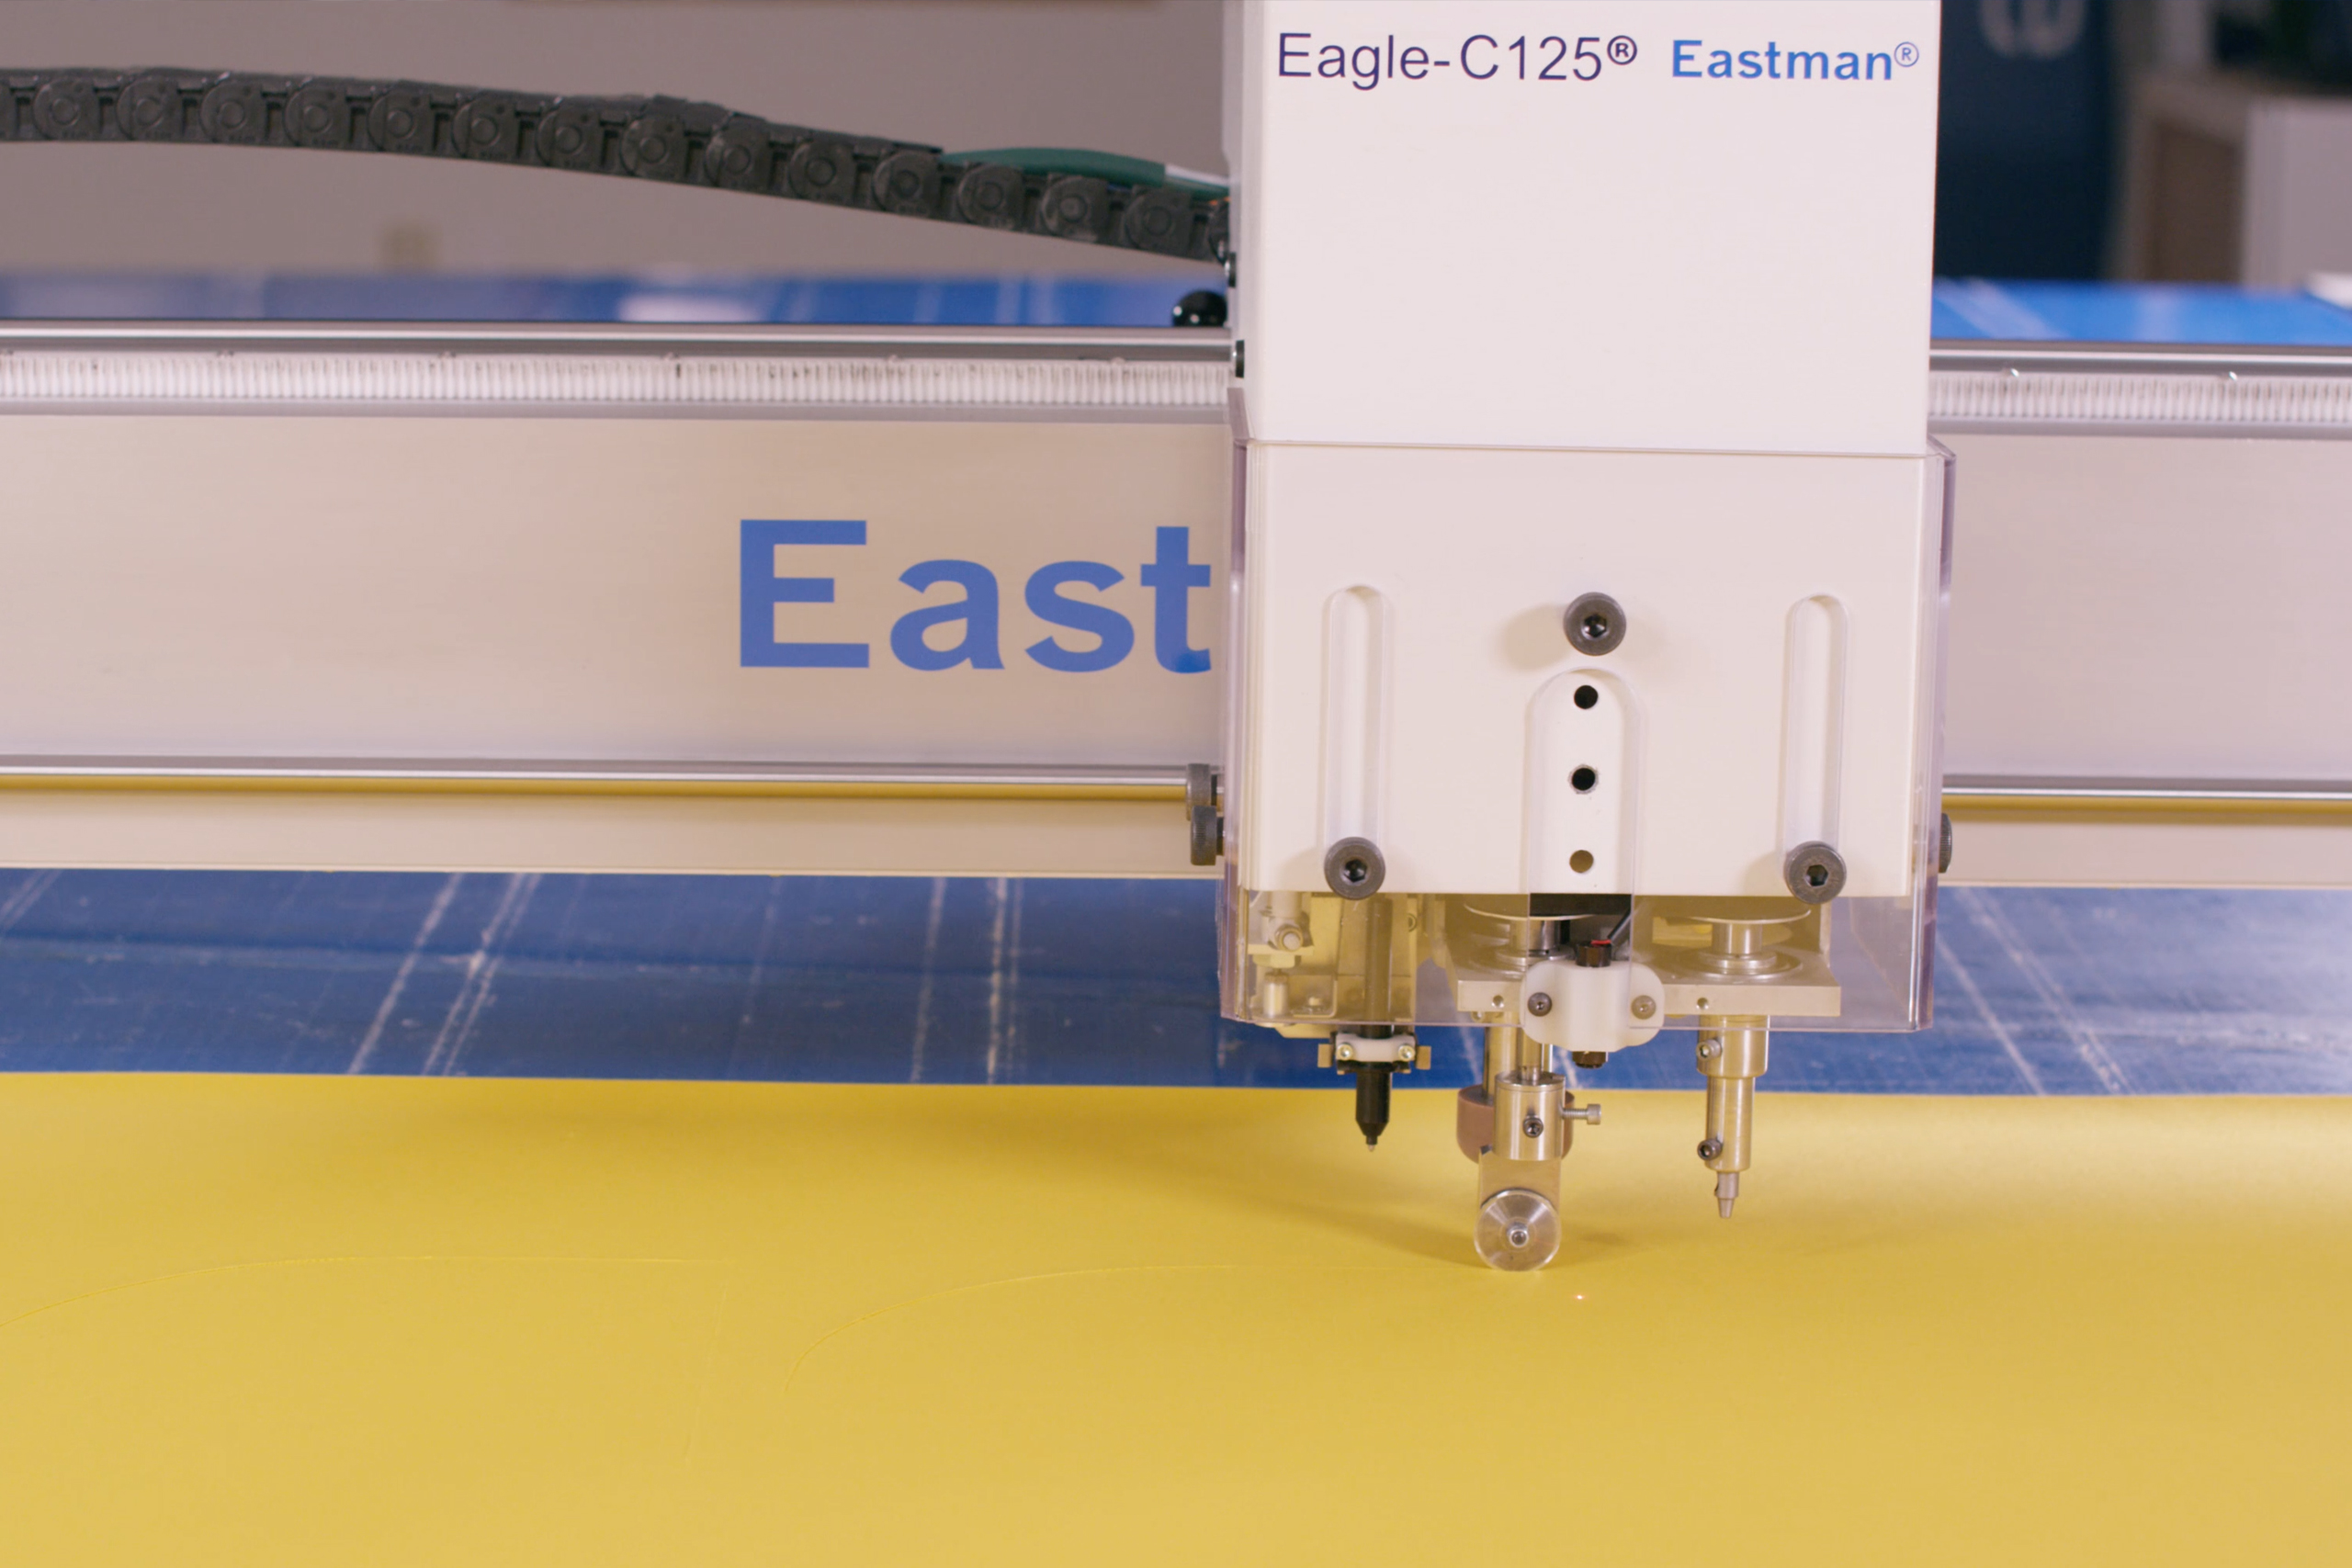 New Eagle-C125 conveyors available for small spaces